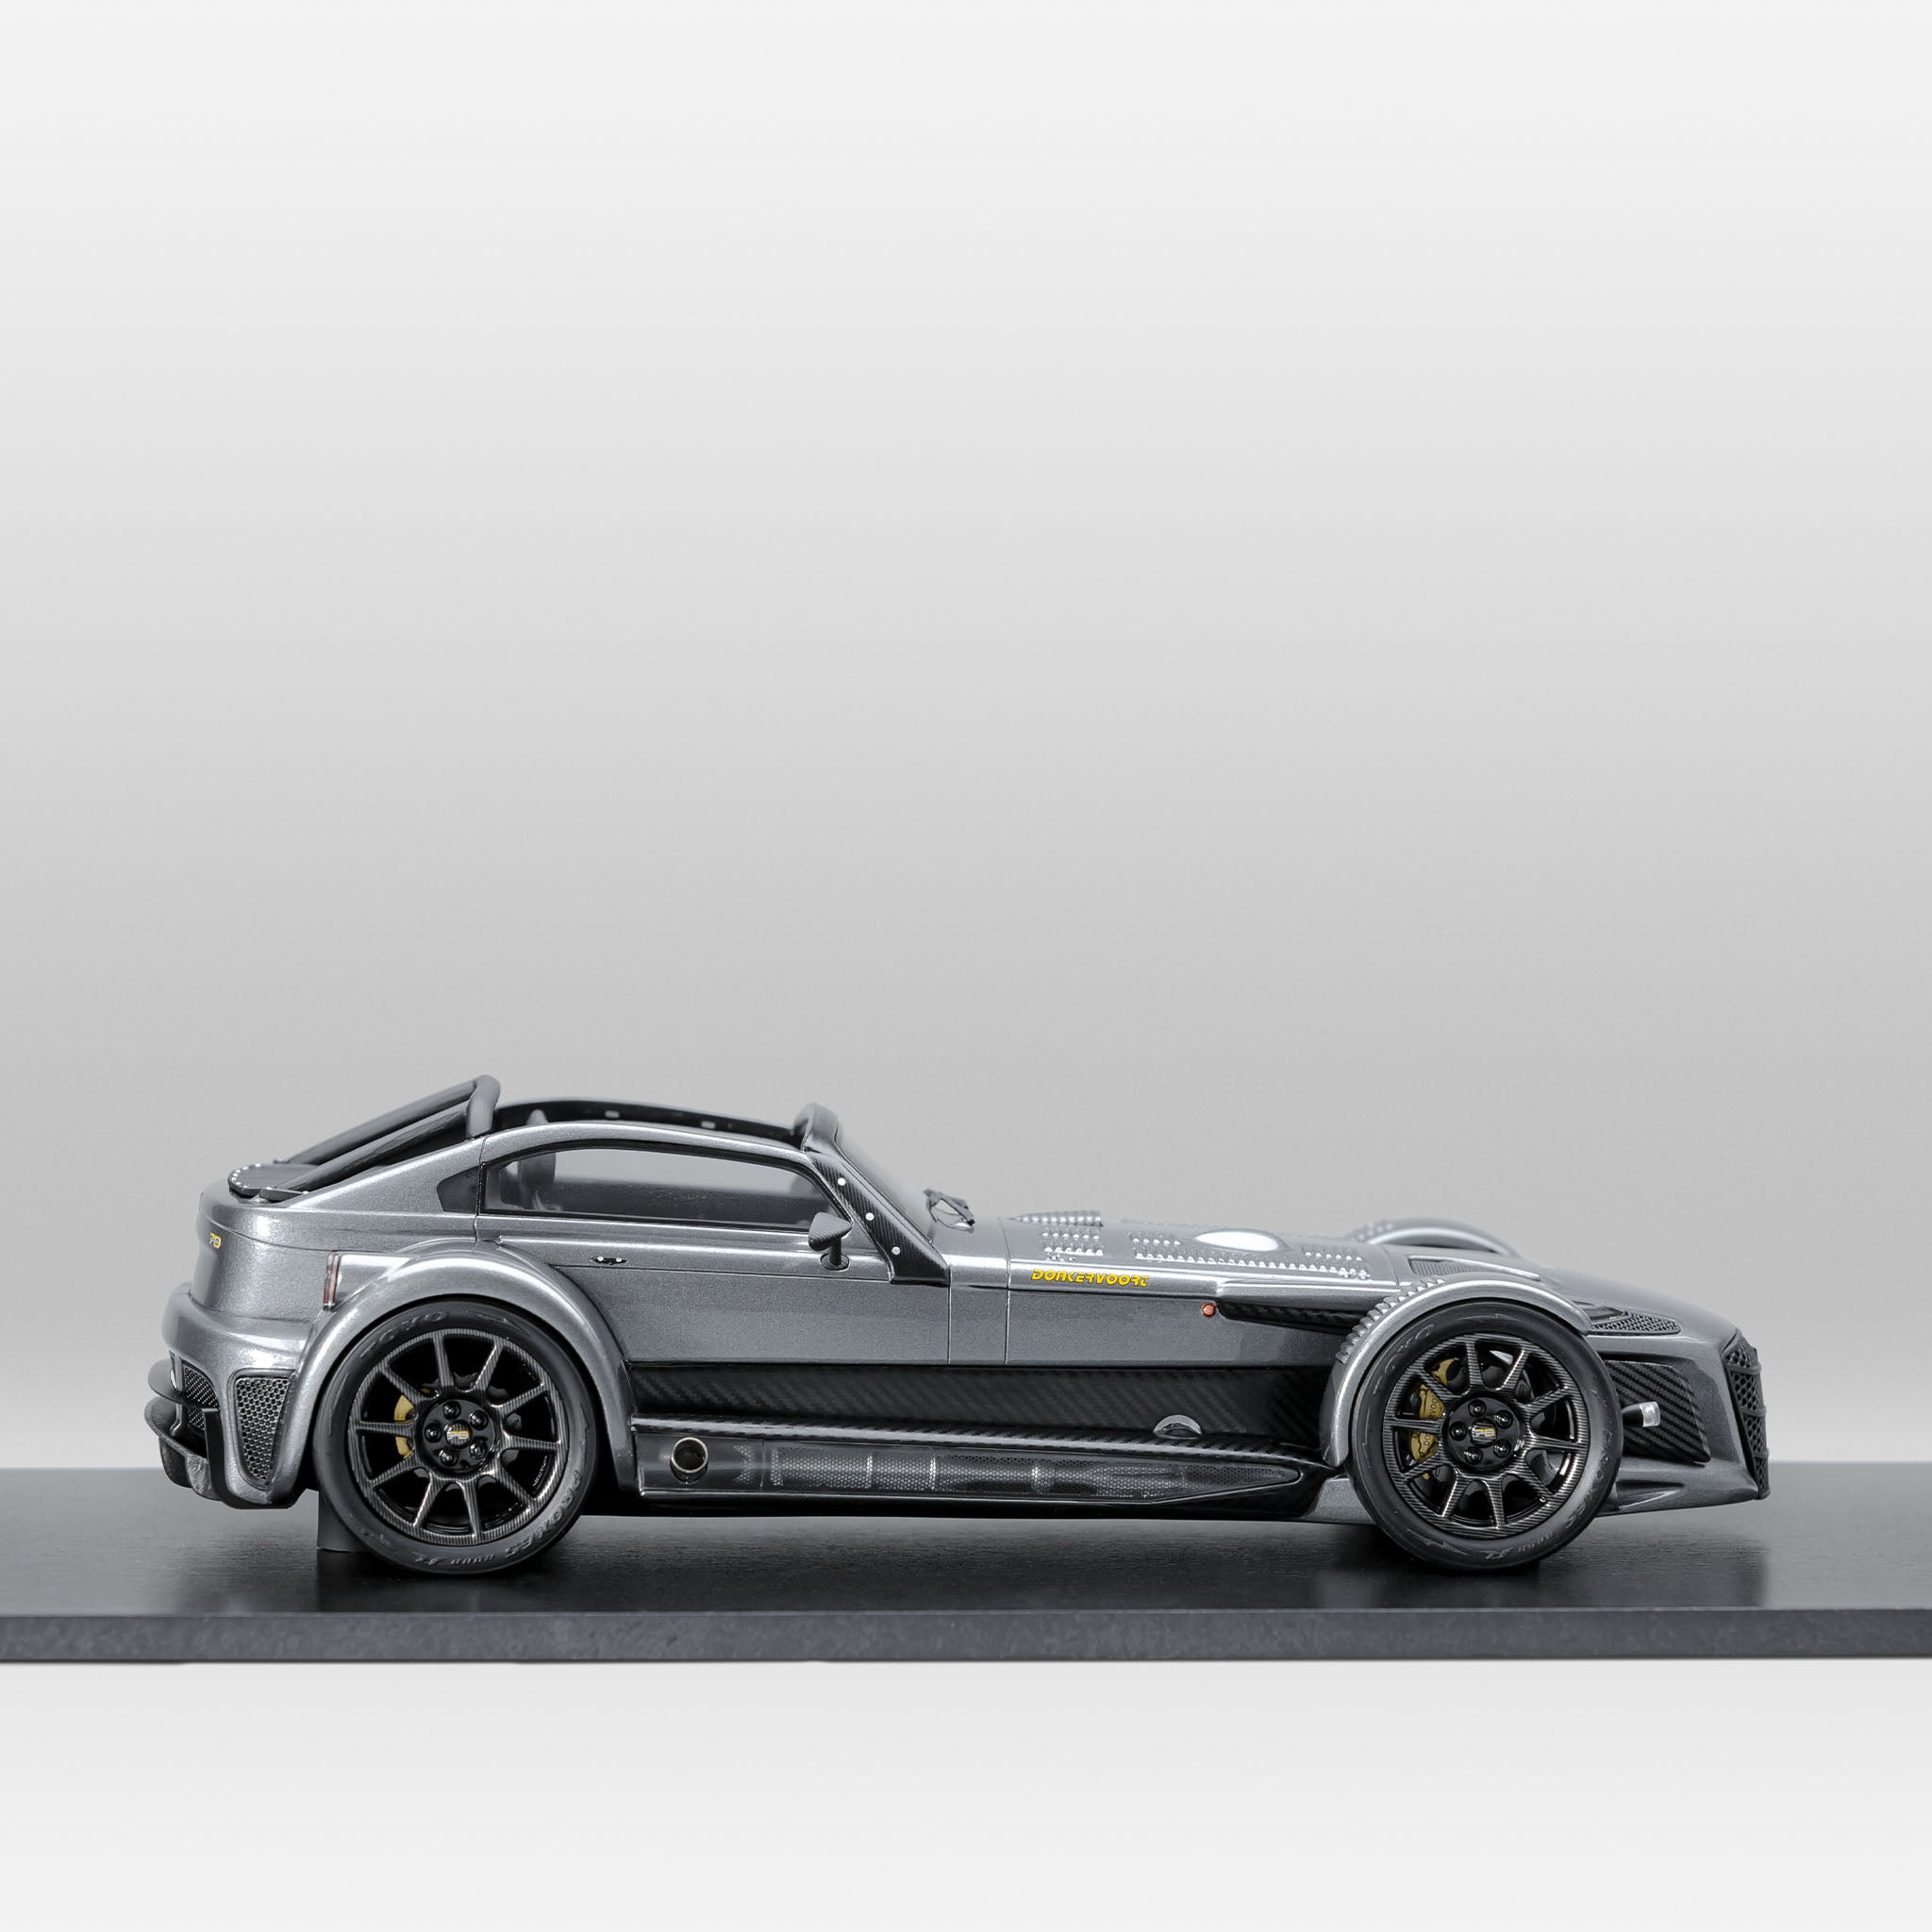 Donkervoort D8 GTO-JD70 1:18 // Anthracite